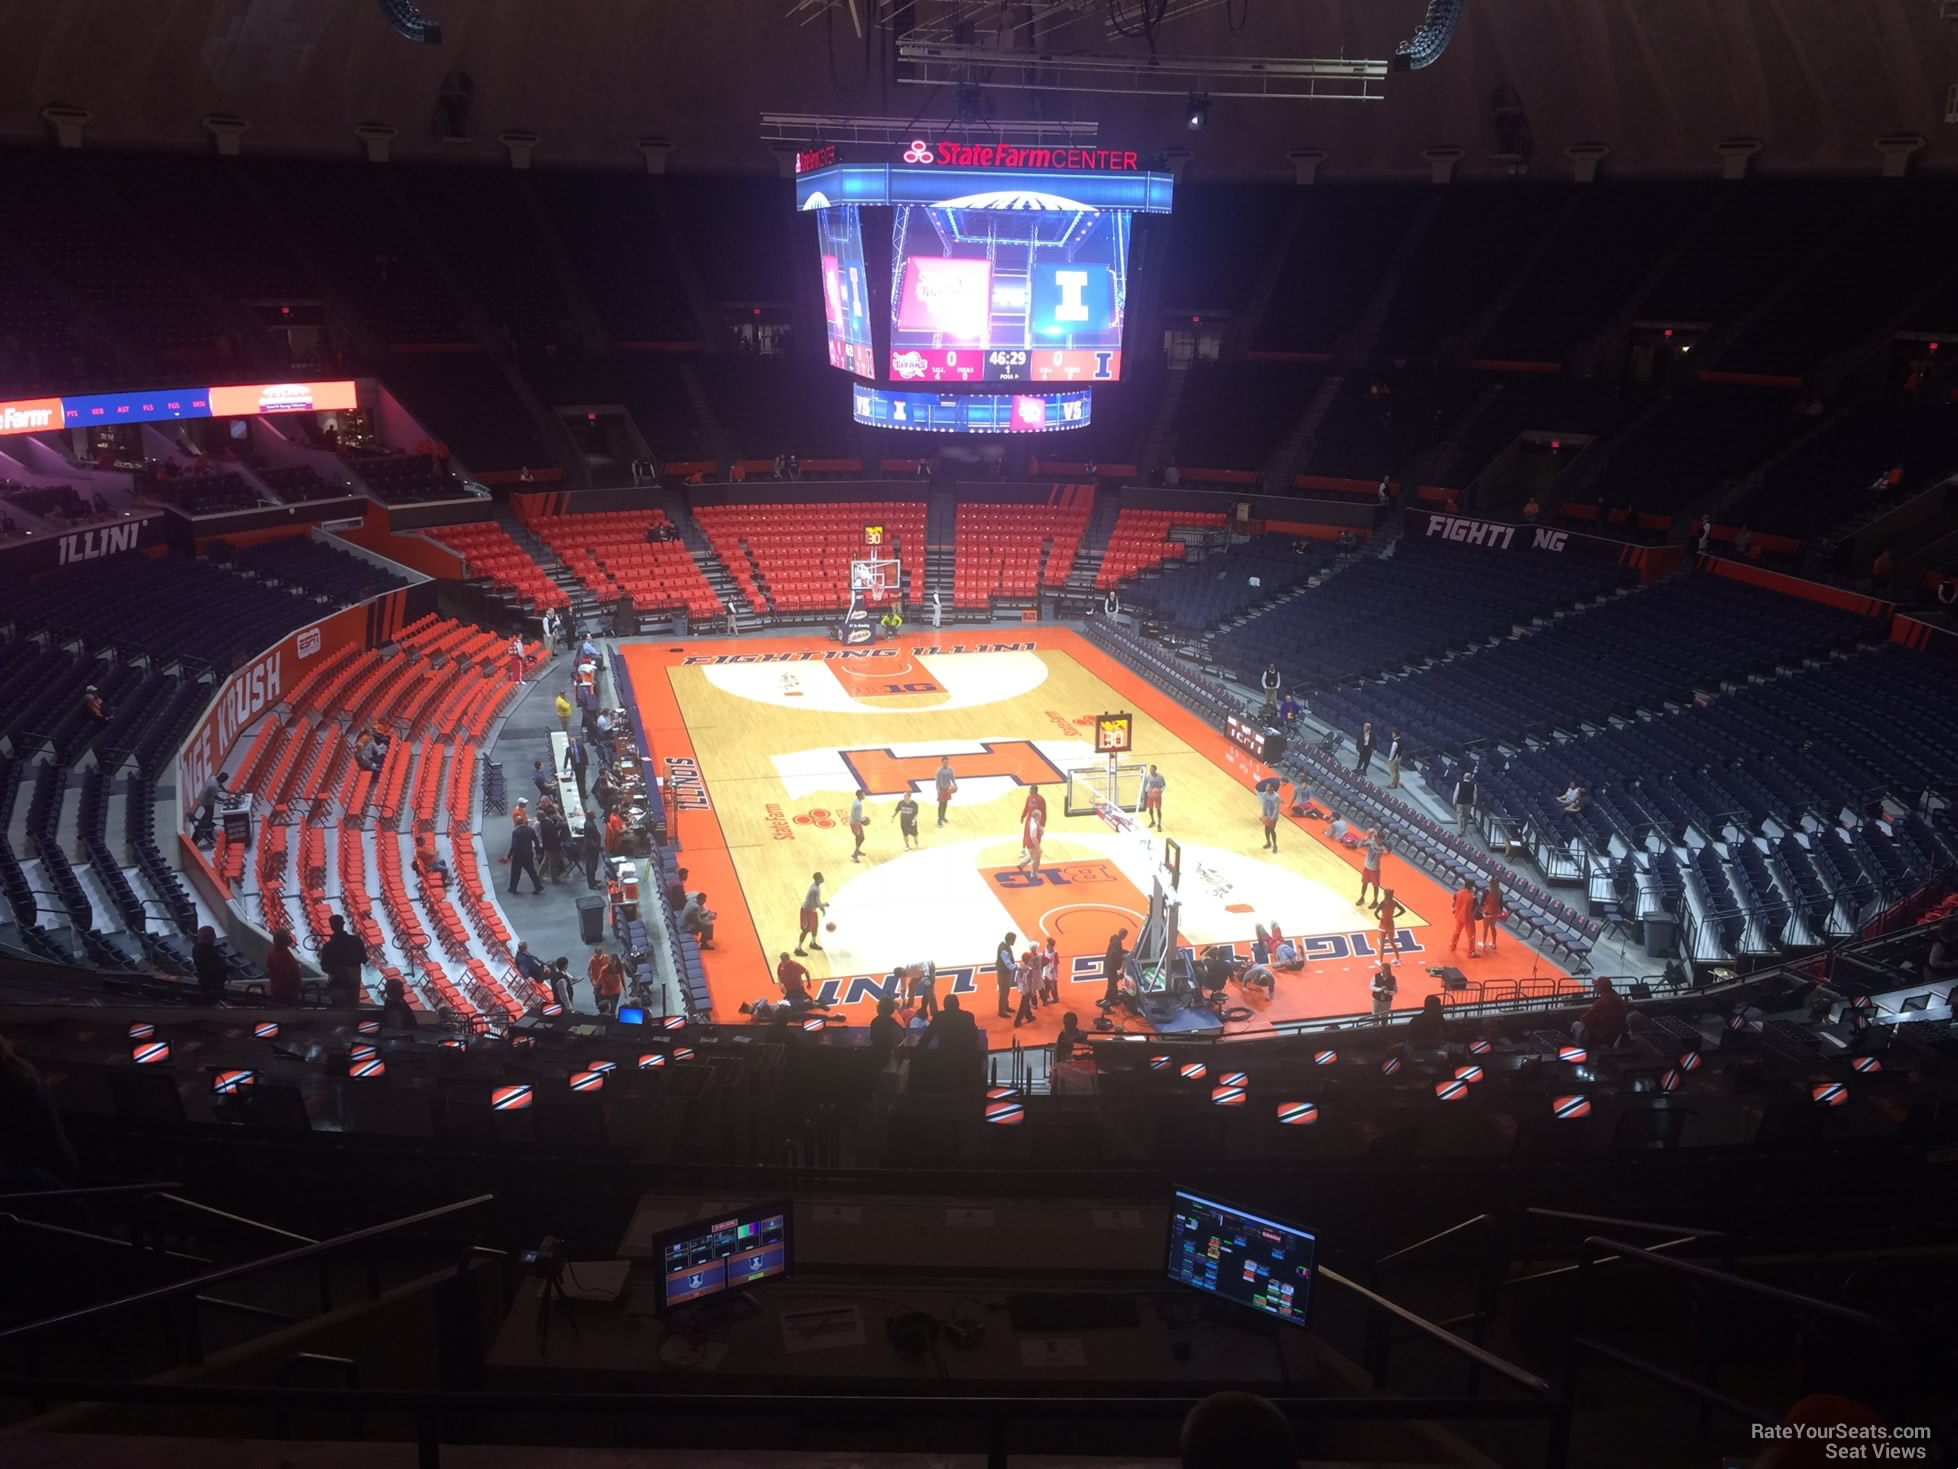 section 215, row 10 seat view  - state farm center